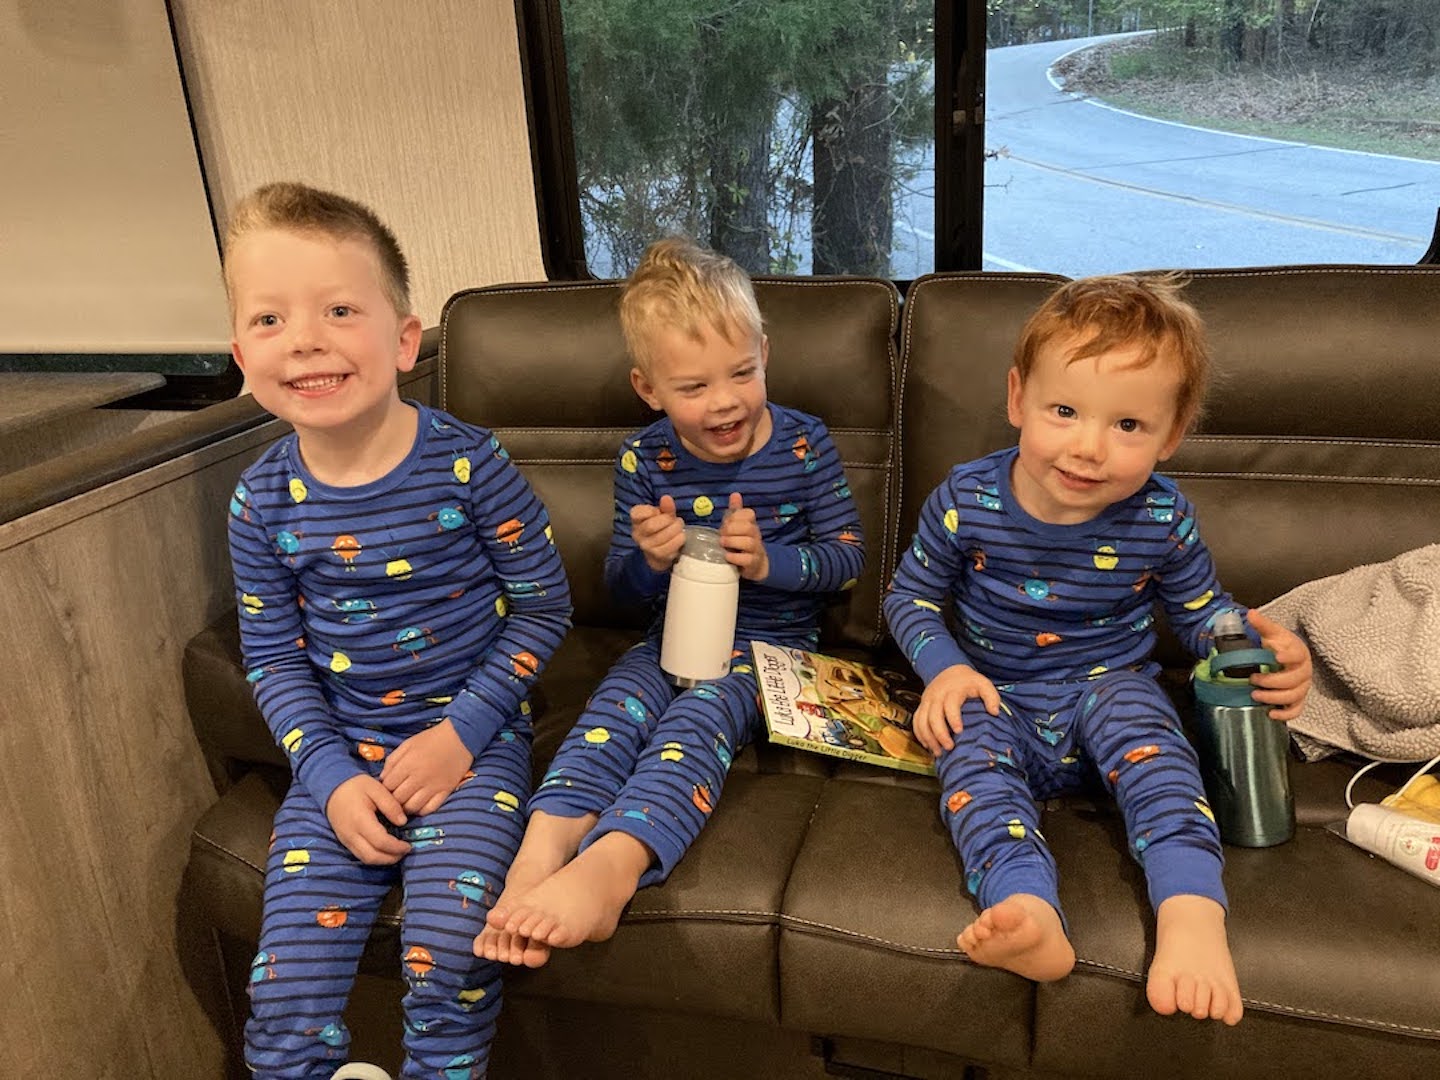 3 youngsters in matching pajamas in trailer